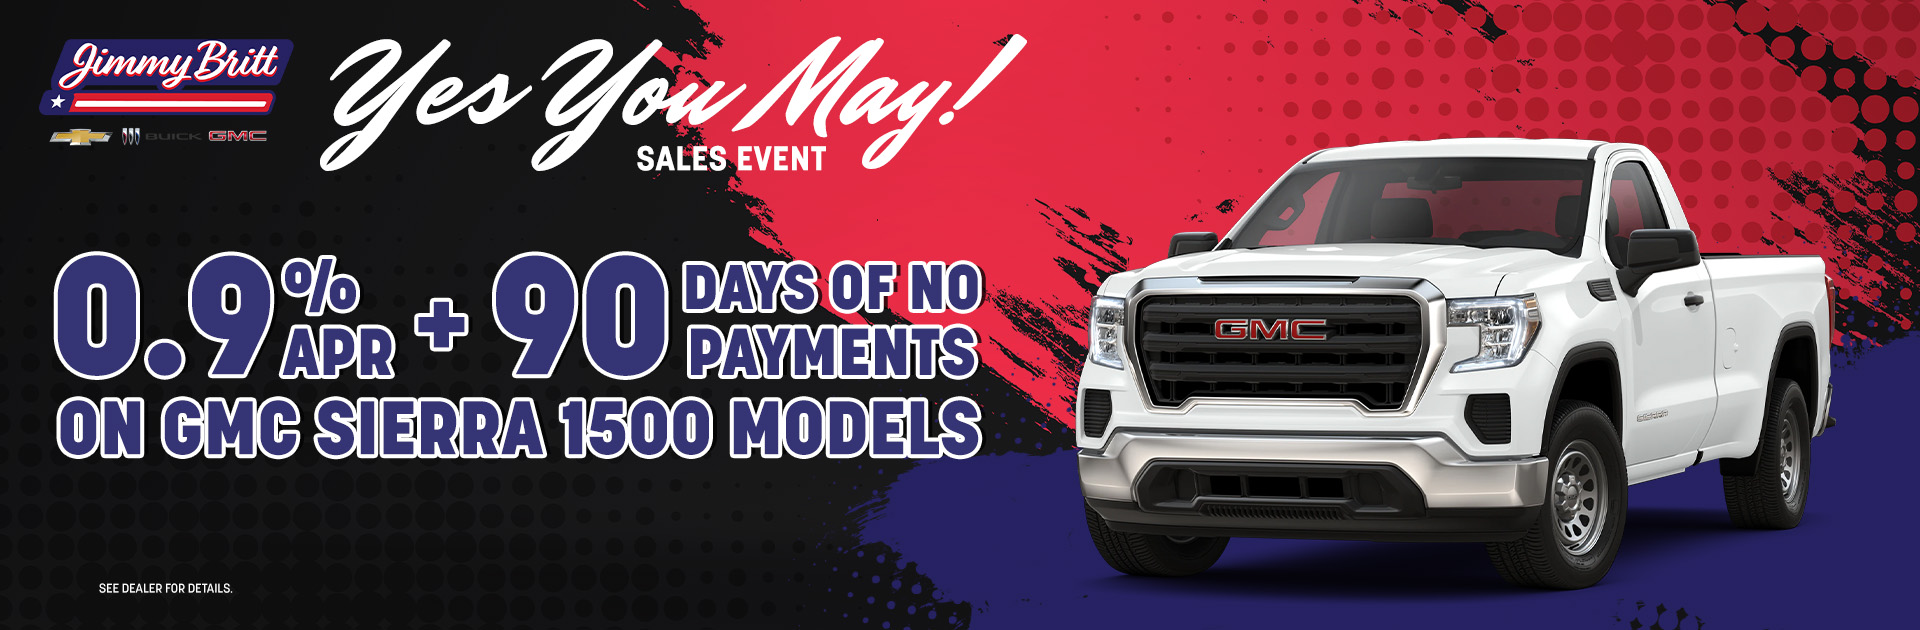 0.9% APR + 90 days of no payments on GMC Sierra 1500 models